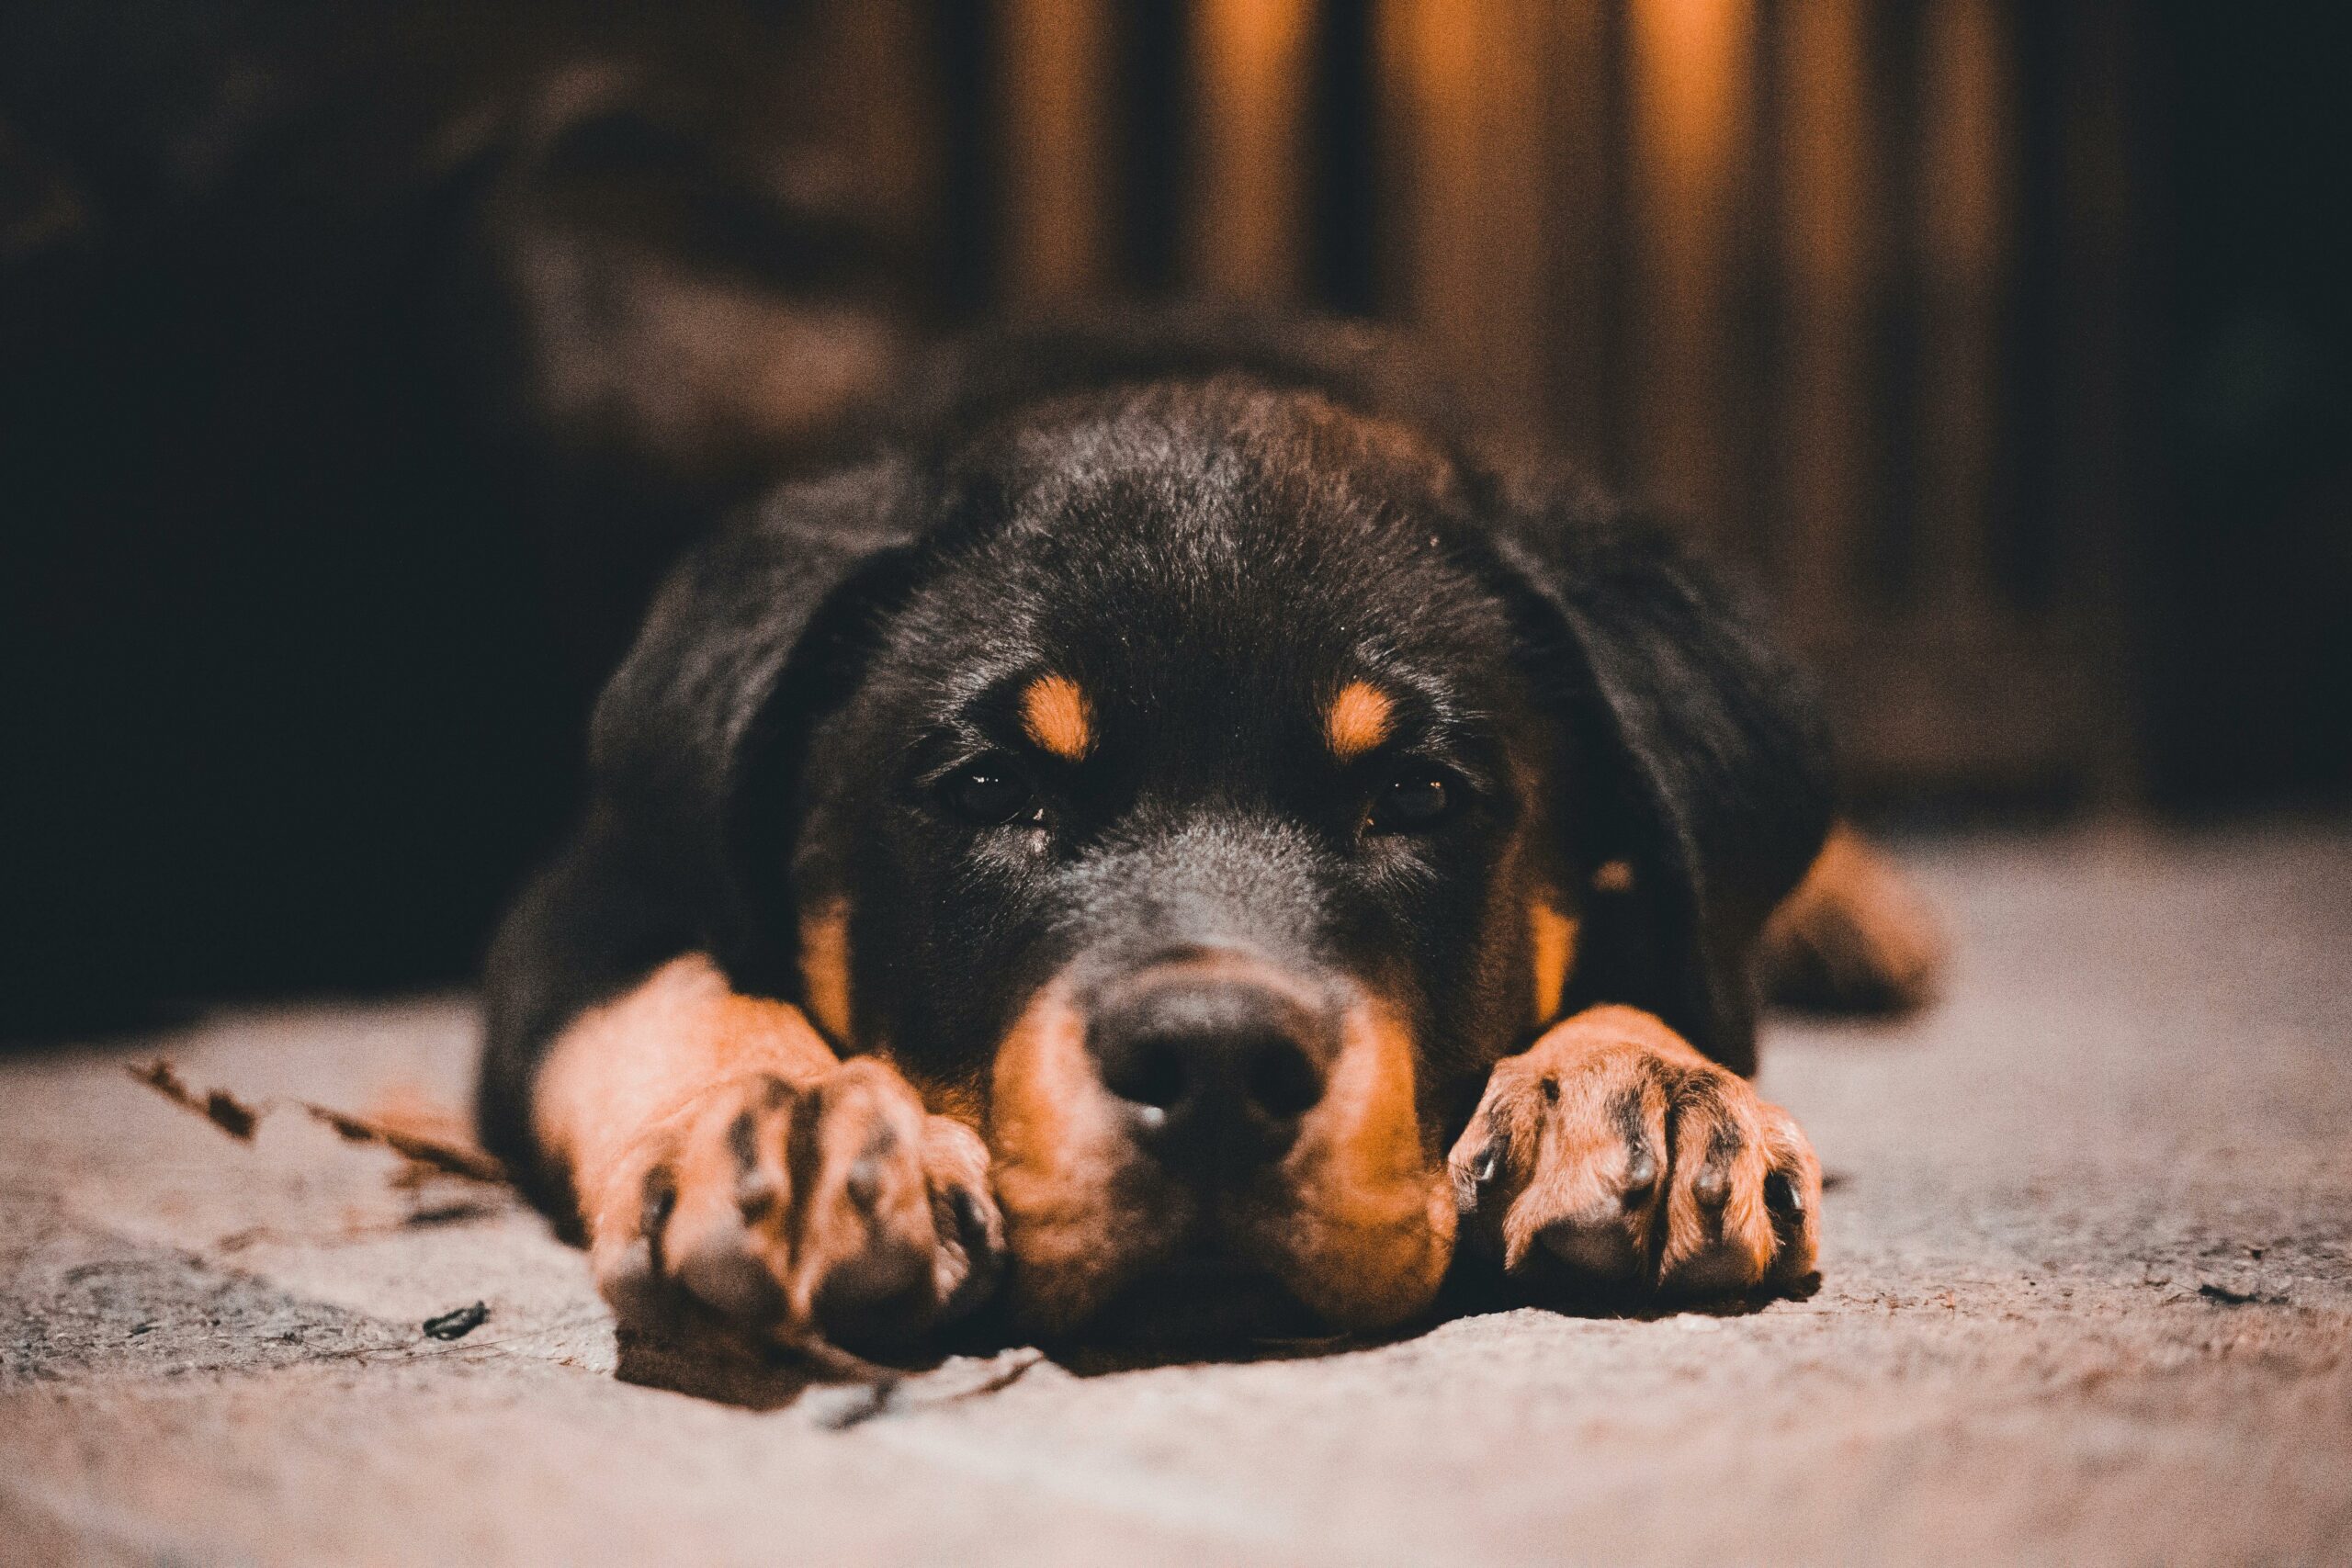 Fear Free Certified Professional Trainer Your Happy Dog Coach client Testimony Yarmouth Nova Scotia Photo by Erik Mclean: https://www.pexels.com/photo/close-up-of-a-rottweiler-12727640/